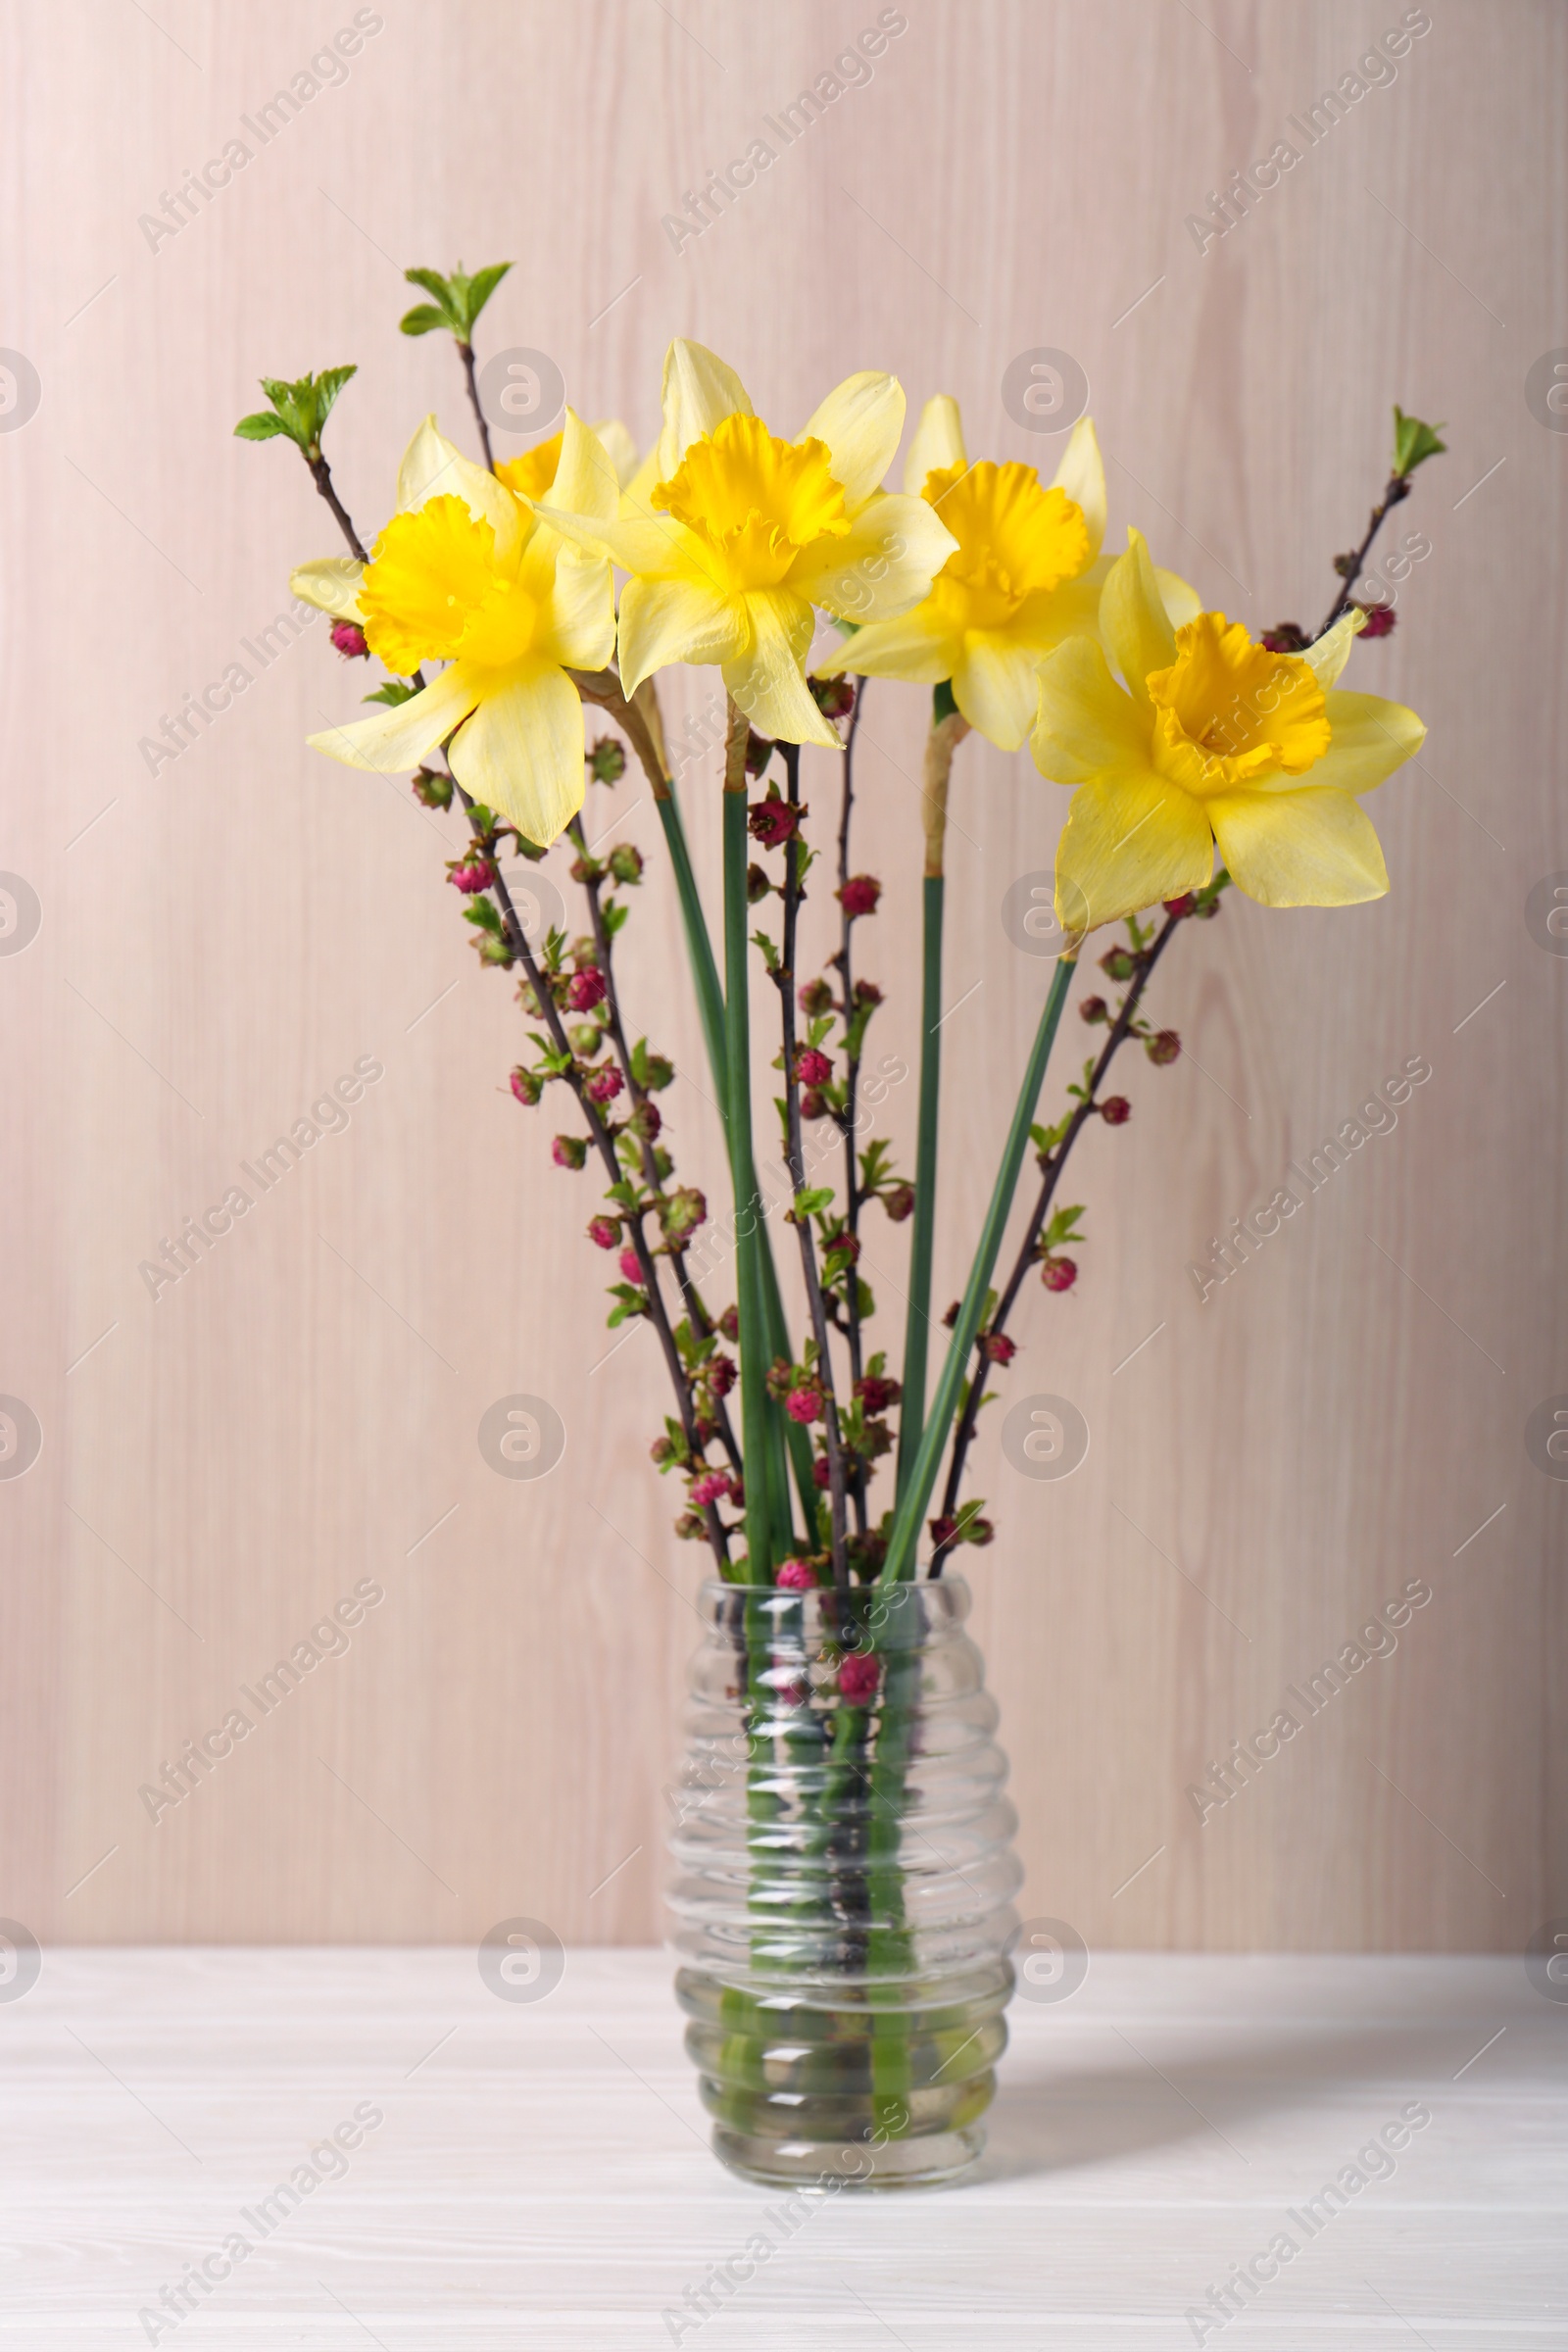 Photo of Bouquet of yellow daffodils and beautiful flowers in vase on white table